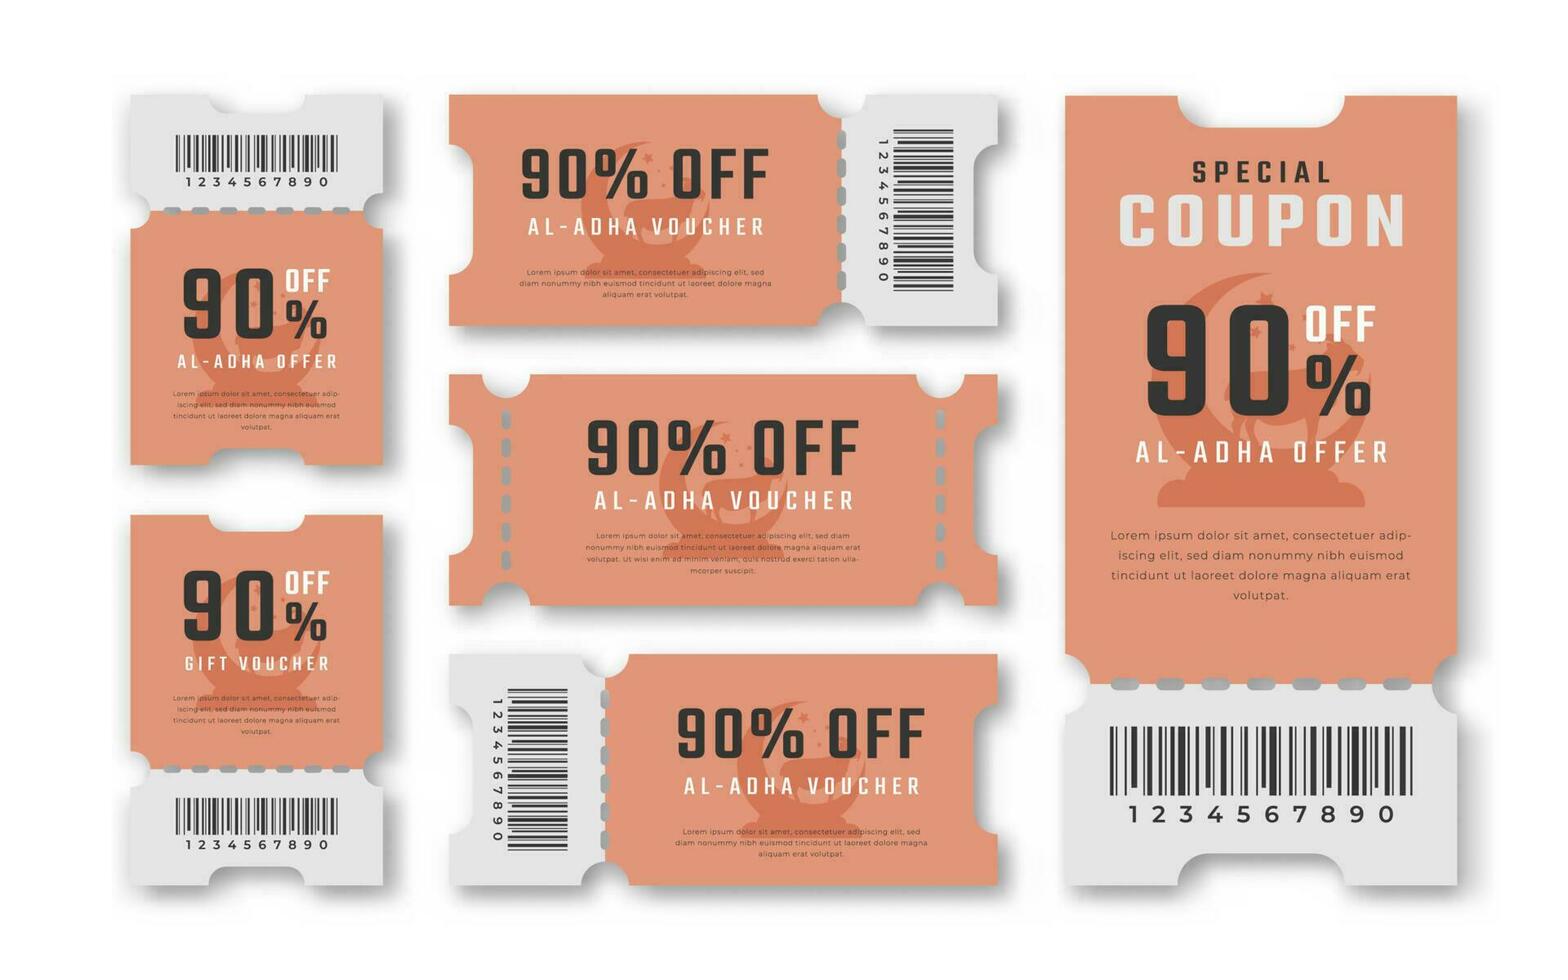 Al Adha Sale Coupon Discount Voucher 90 Percent off for Promo Code, Shopping, Marketing and Best Promo Retail Pricing Vector Illustration